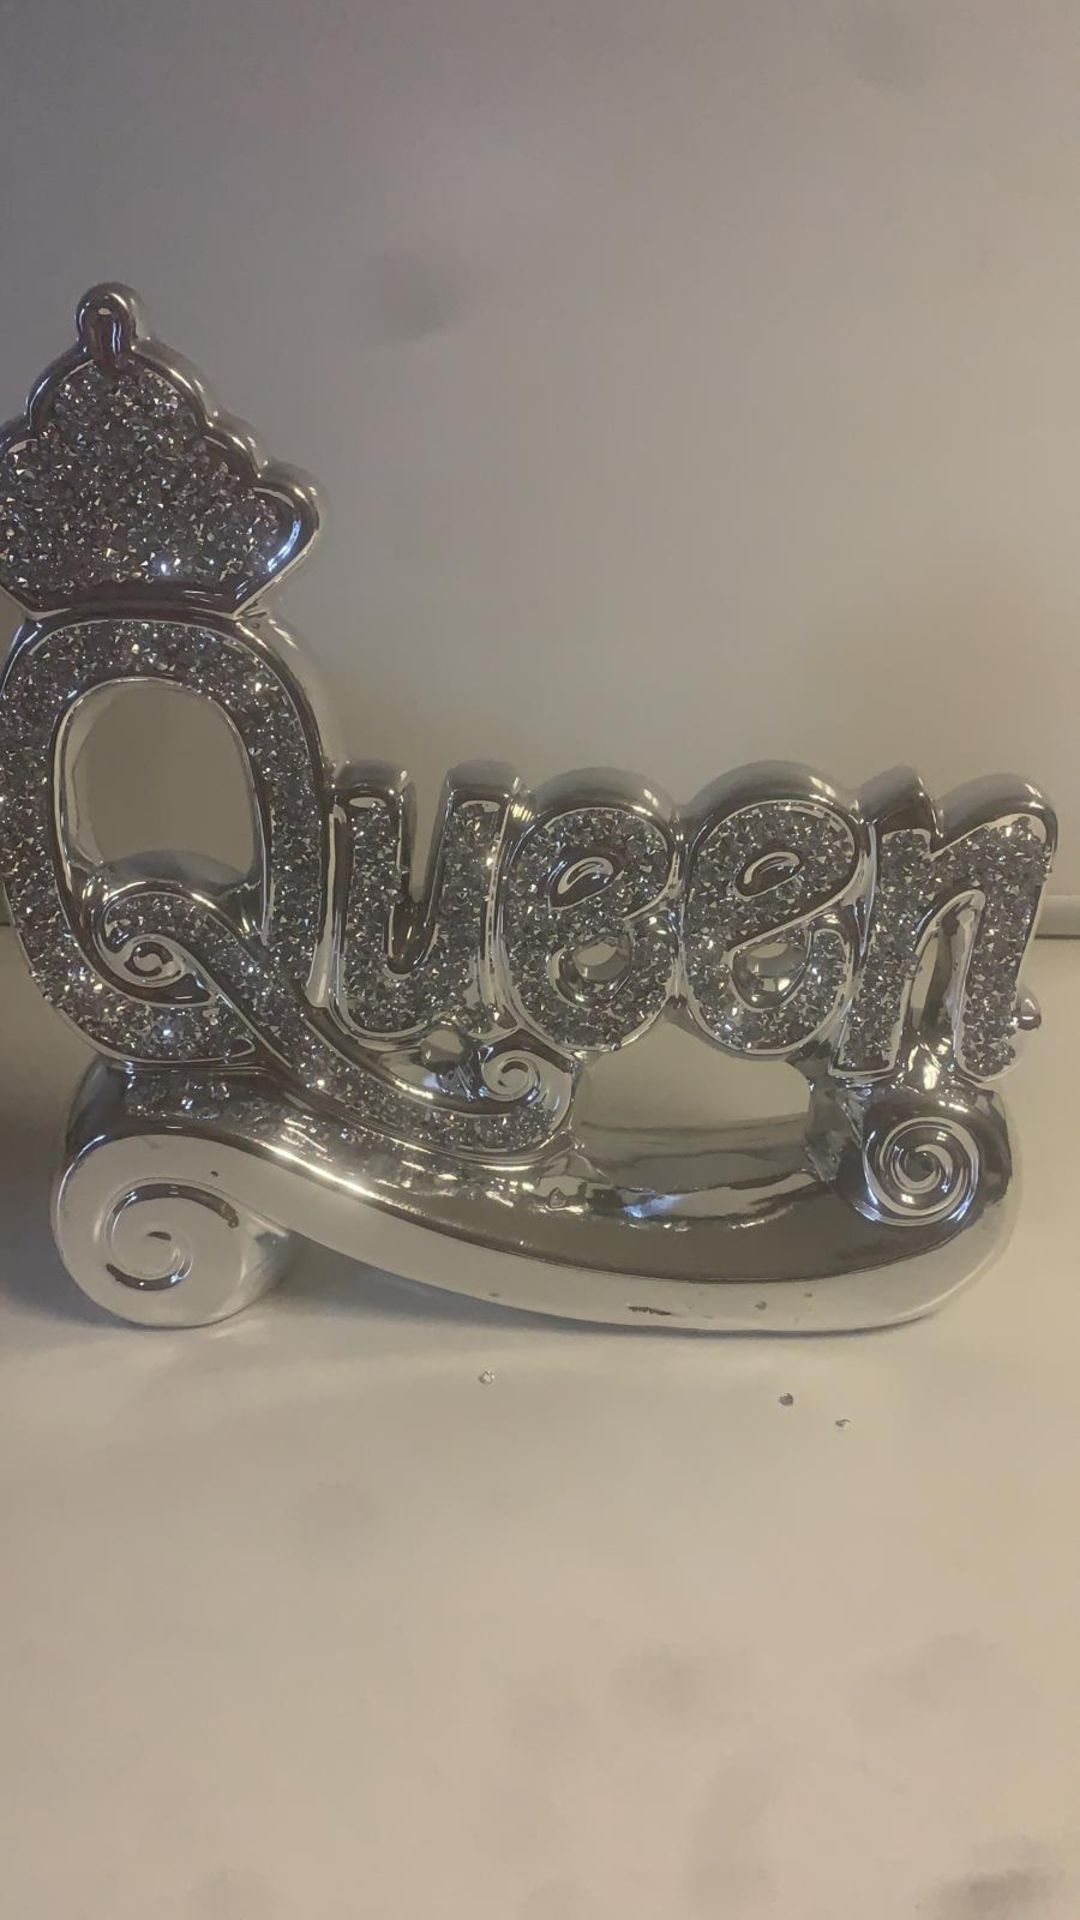 LARGE QUEEN SILVER BLING ORNAMENT